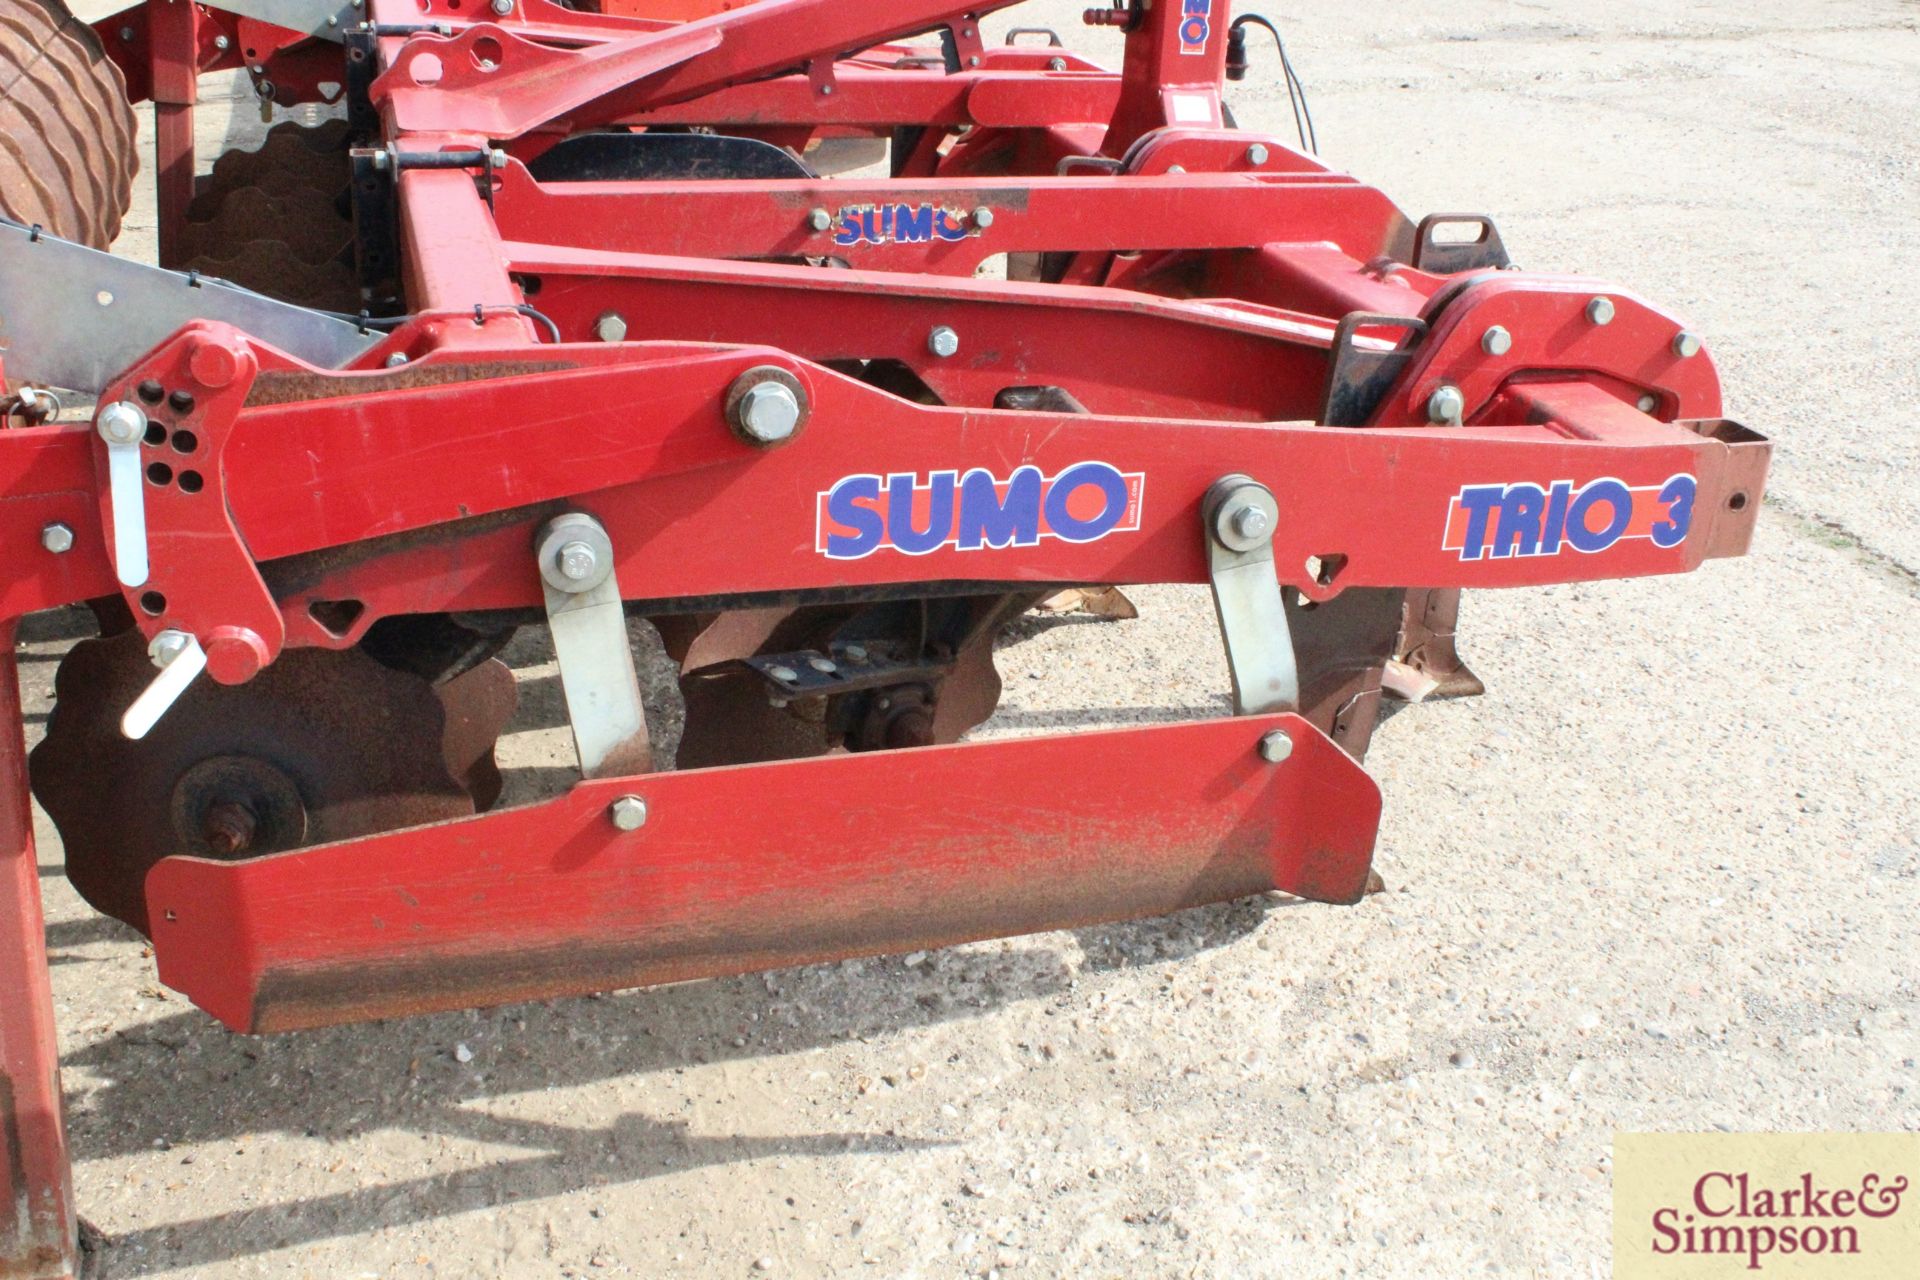 Sumo Trio 3 3m mounted cultivator 2012. Serial number 11626. With six Metcalfe low disturbance legs, - Image 18 of 21